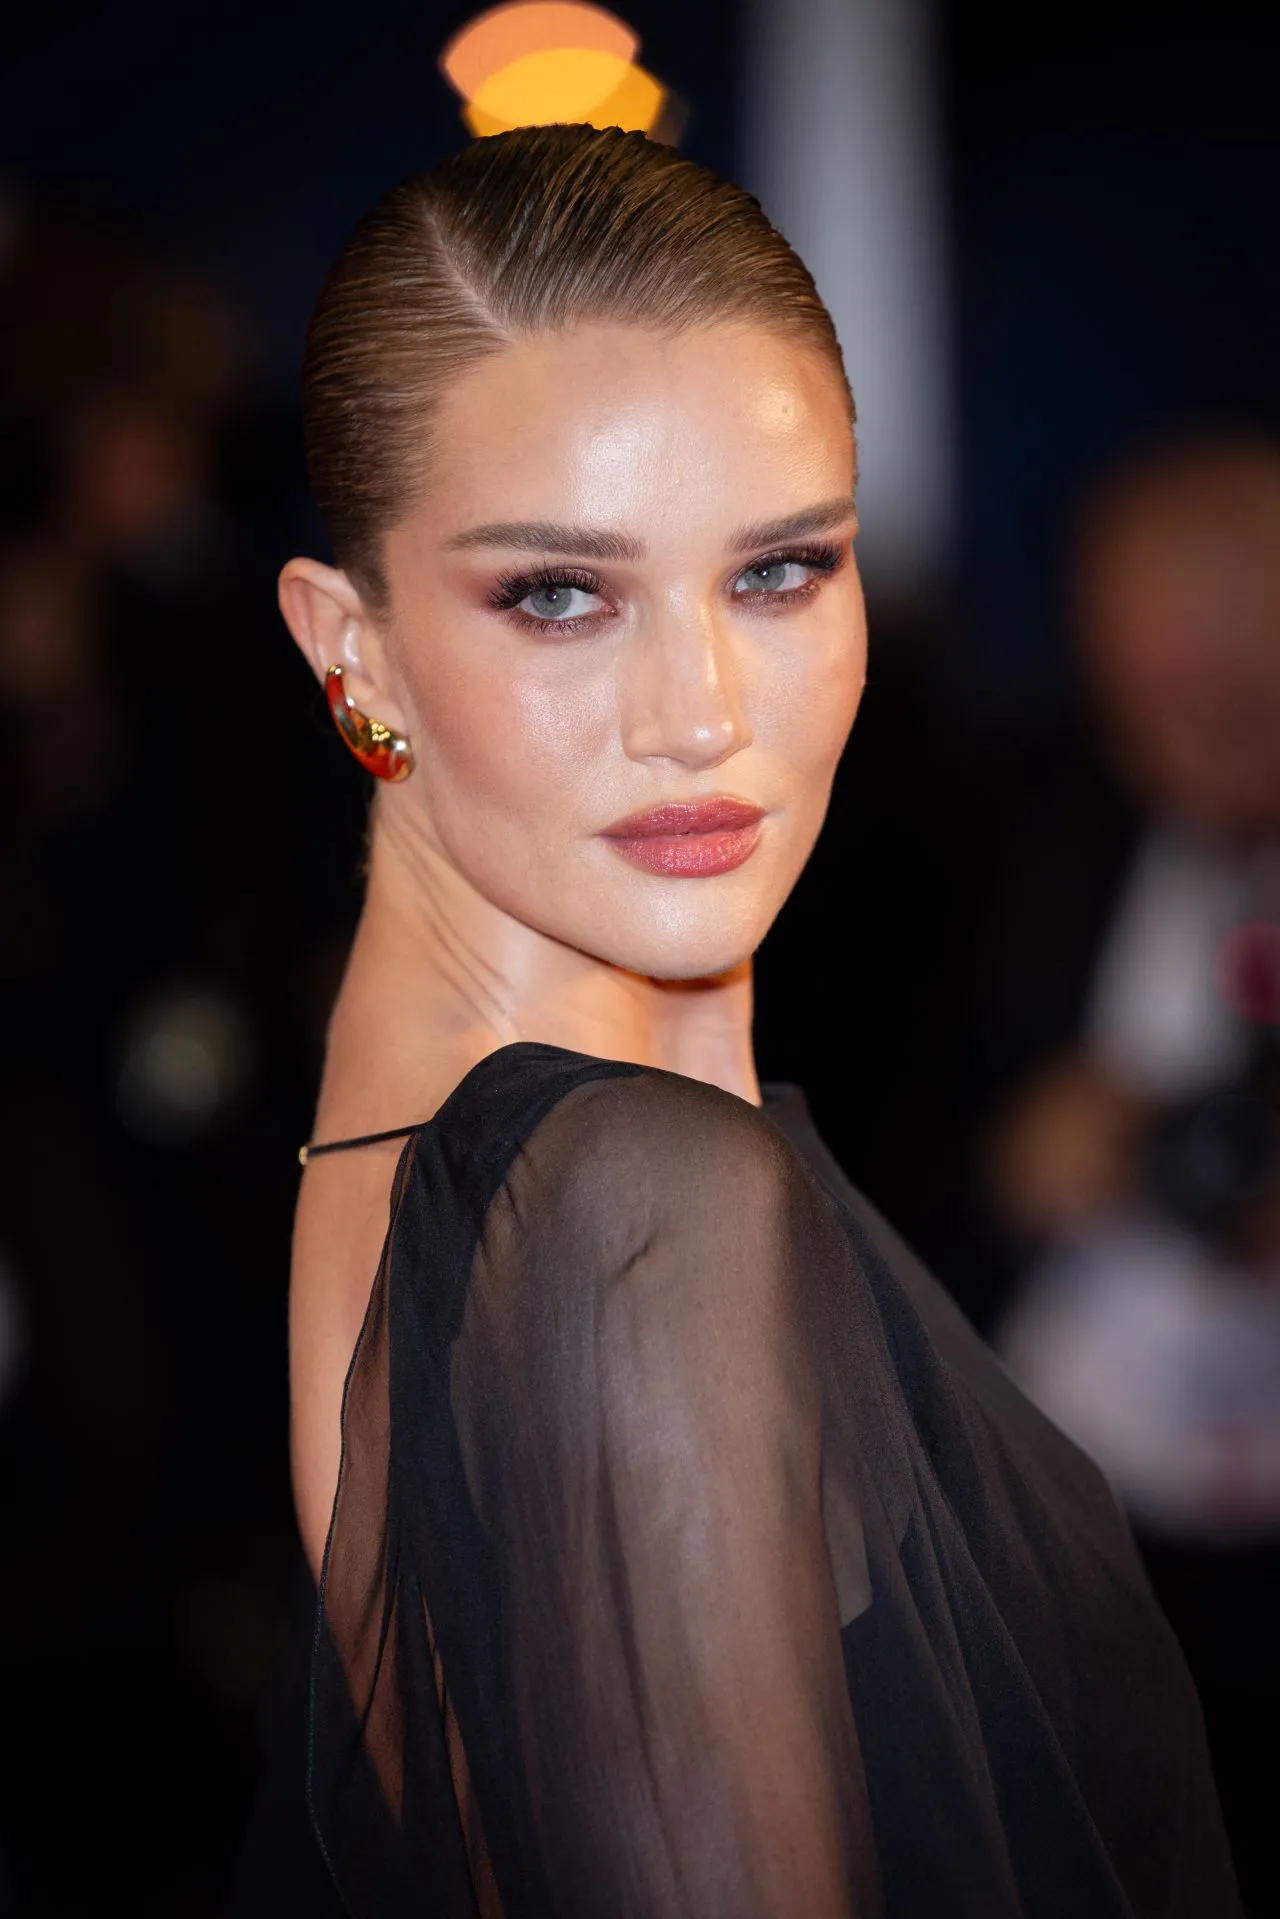 ROSIE HUNTINGTON WHITELEY AT THE SHROUDS PREMIERE AT CANNES FILM FESTIVAL01